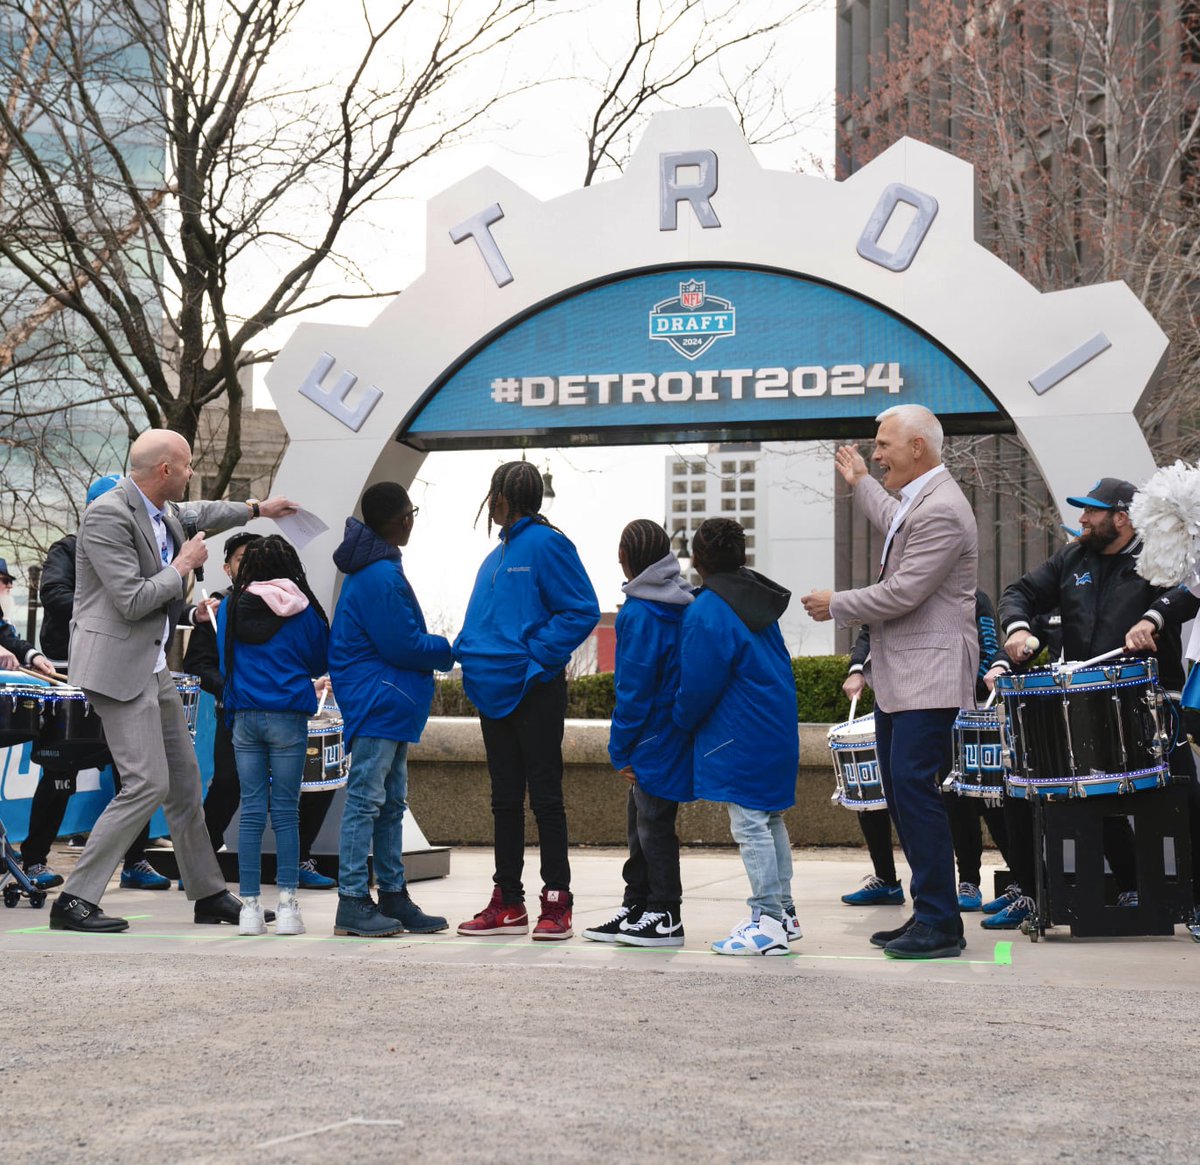 Last week's community event celebrating the #NFLDraft coming to Detroit in 2024 was an incredible moment for our city, region, and state! @detsports @visitdetroit @Lions visitdetroit.com/the-2024-nfl-d…